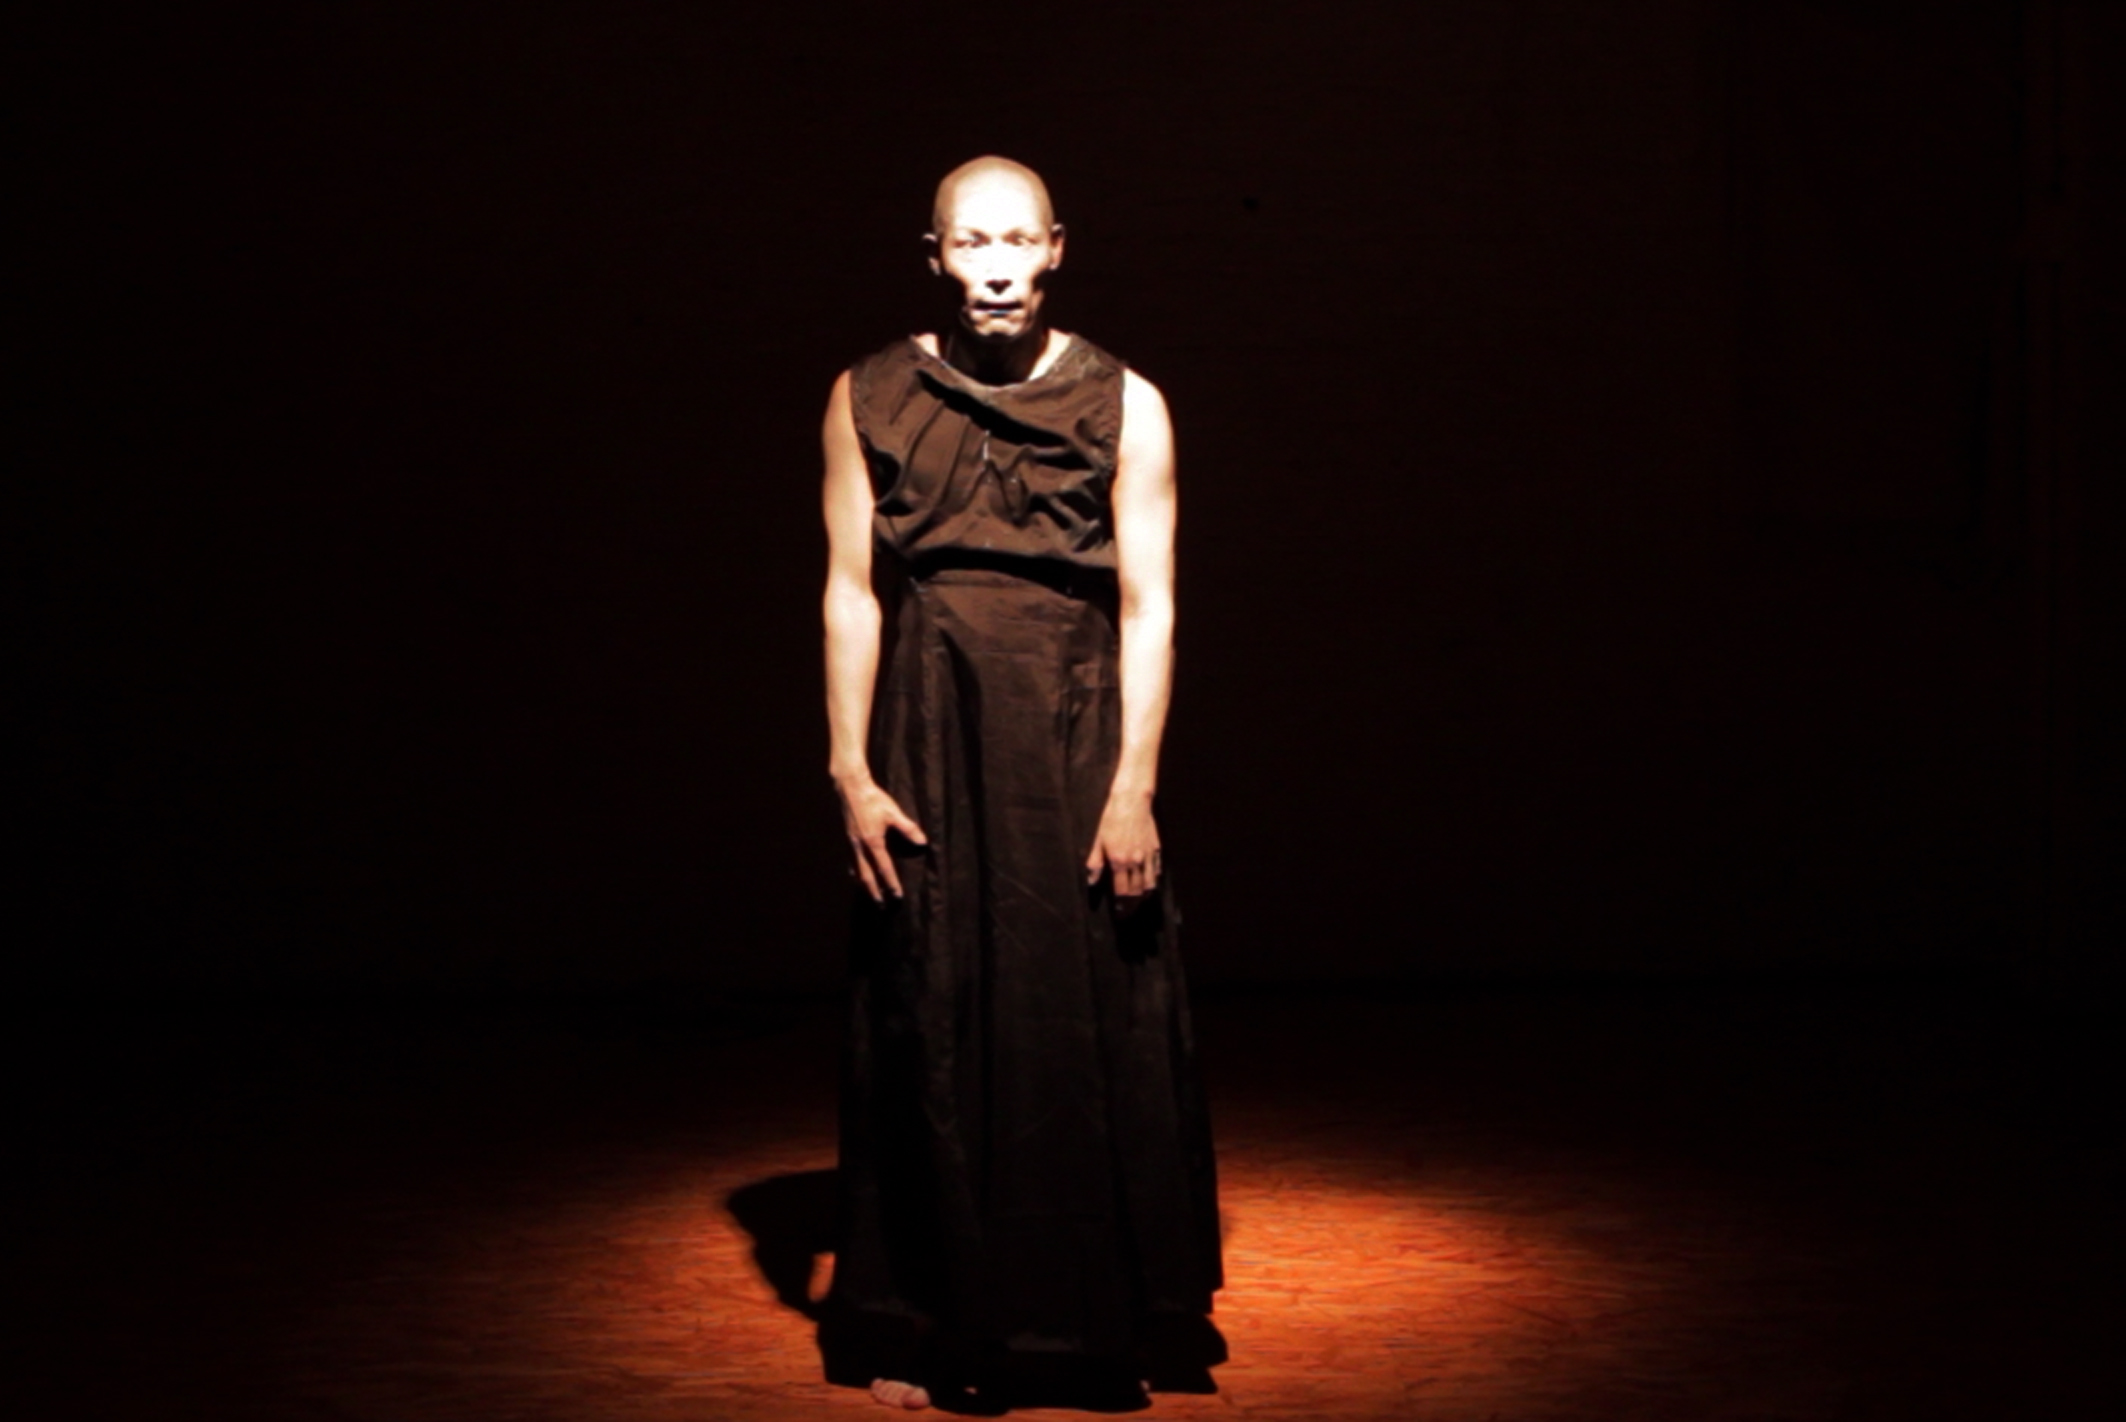 Announcement // 4RUDE Butoh Dance Performance at ACUD Theater Berlin